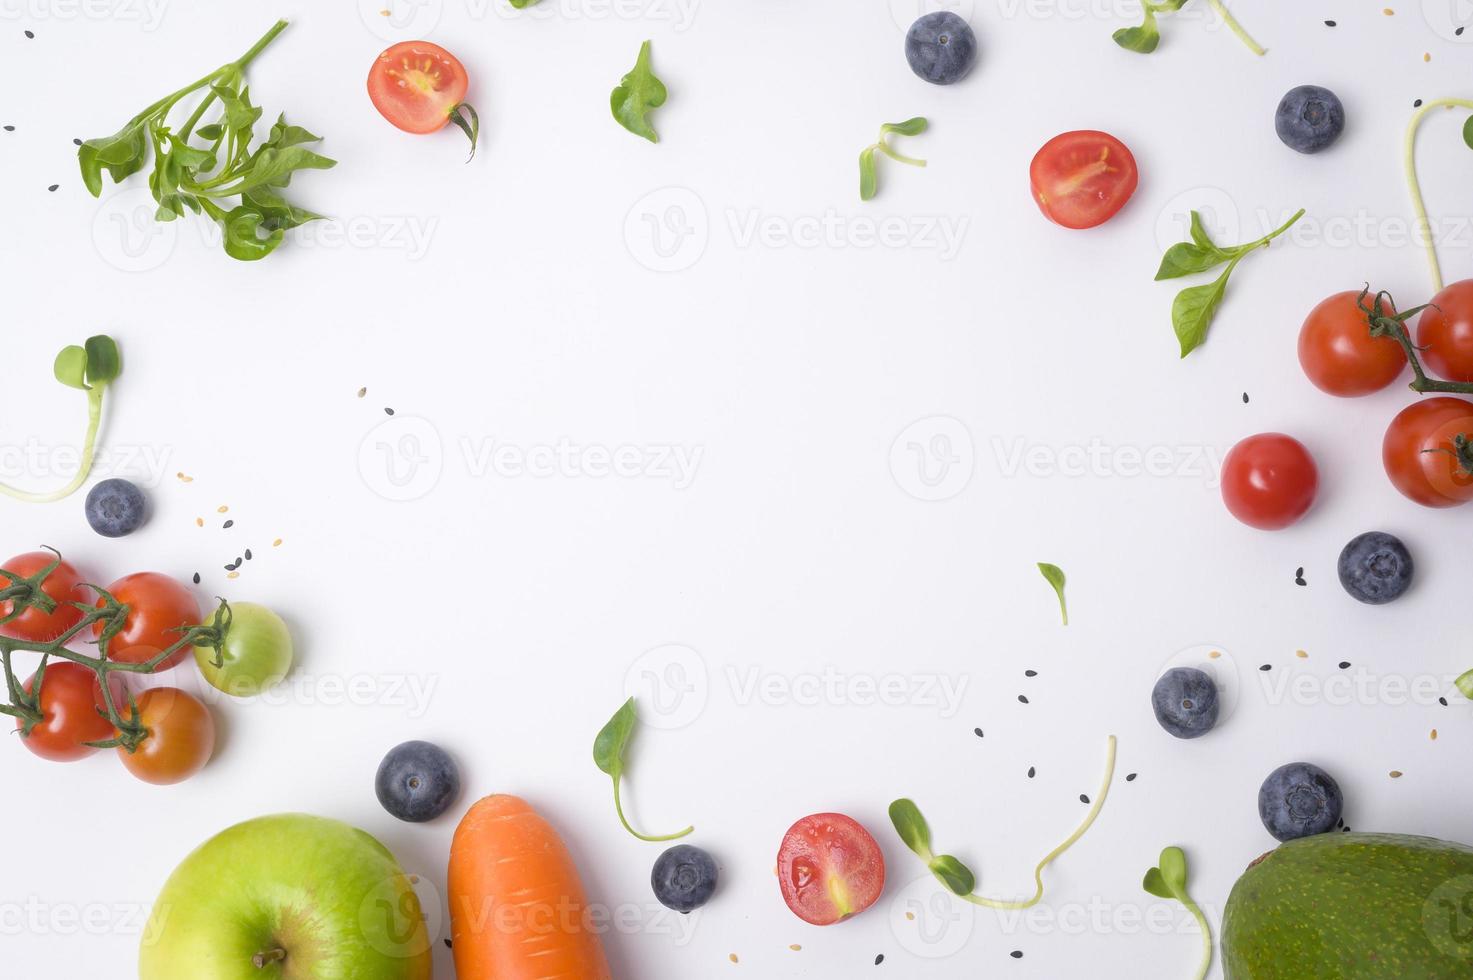 Healthy freshness vegetables and fruits on white background , Healthy eating concept photo